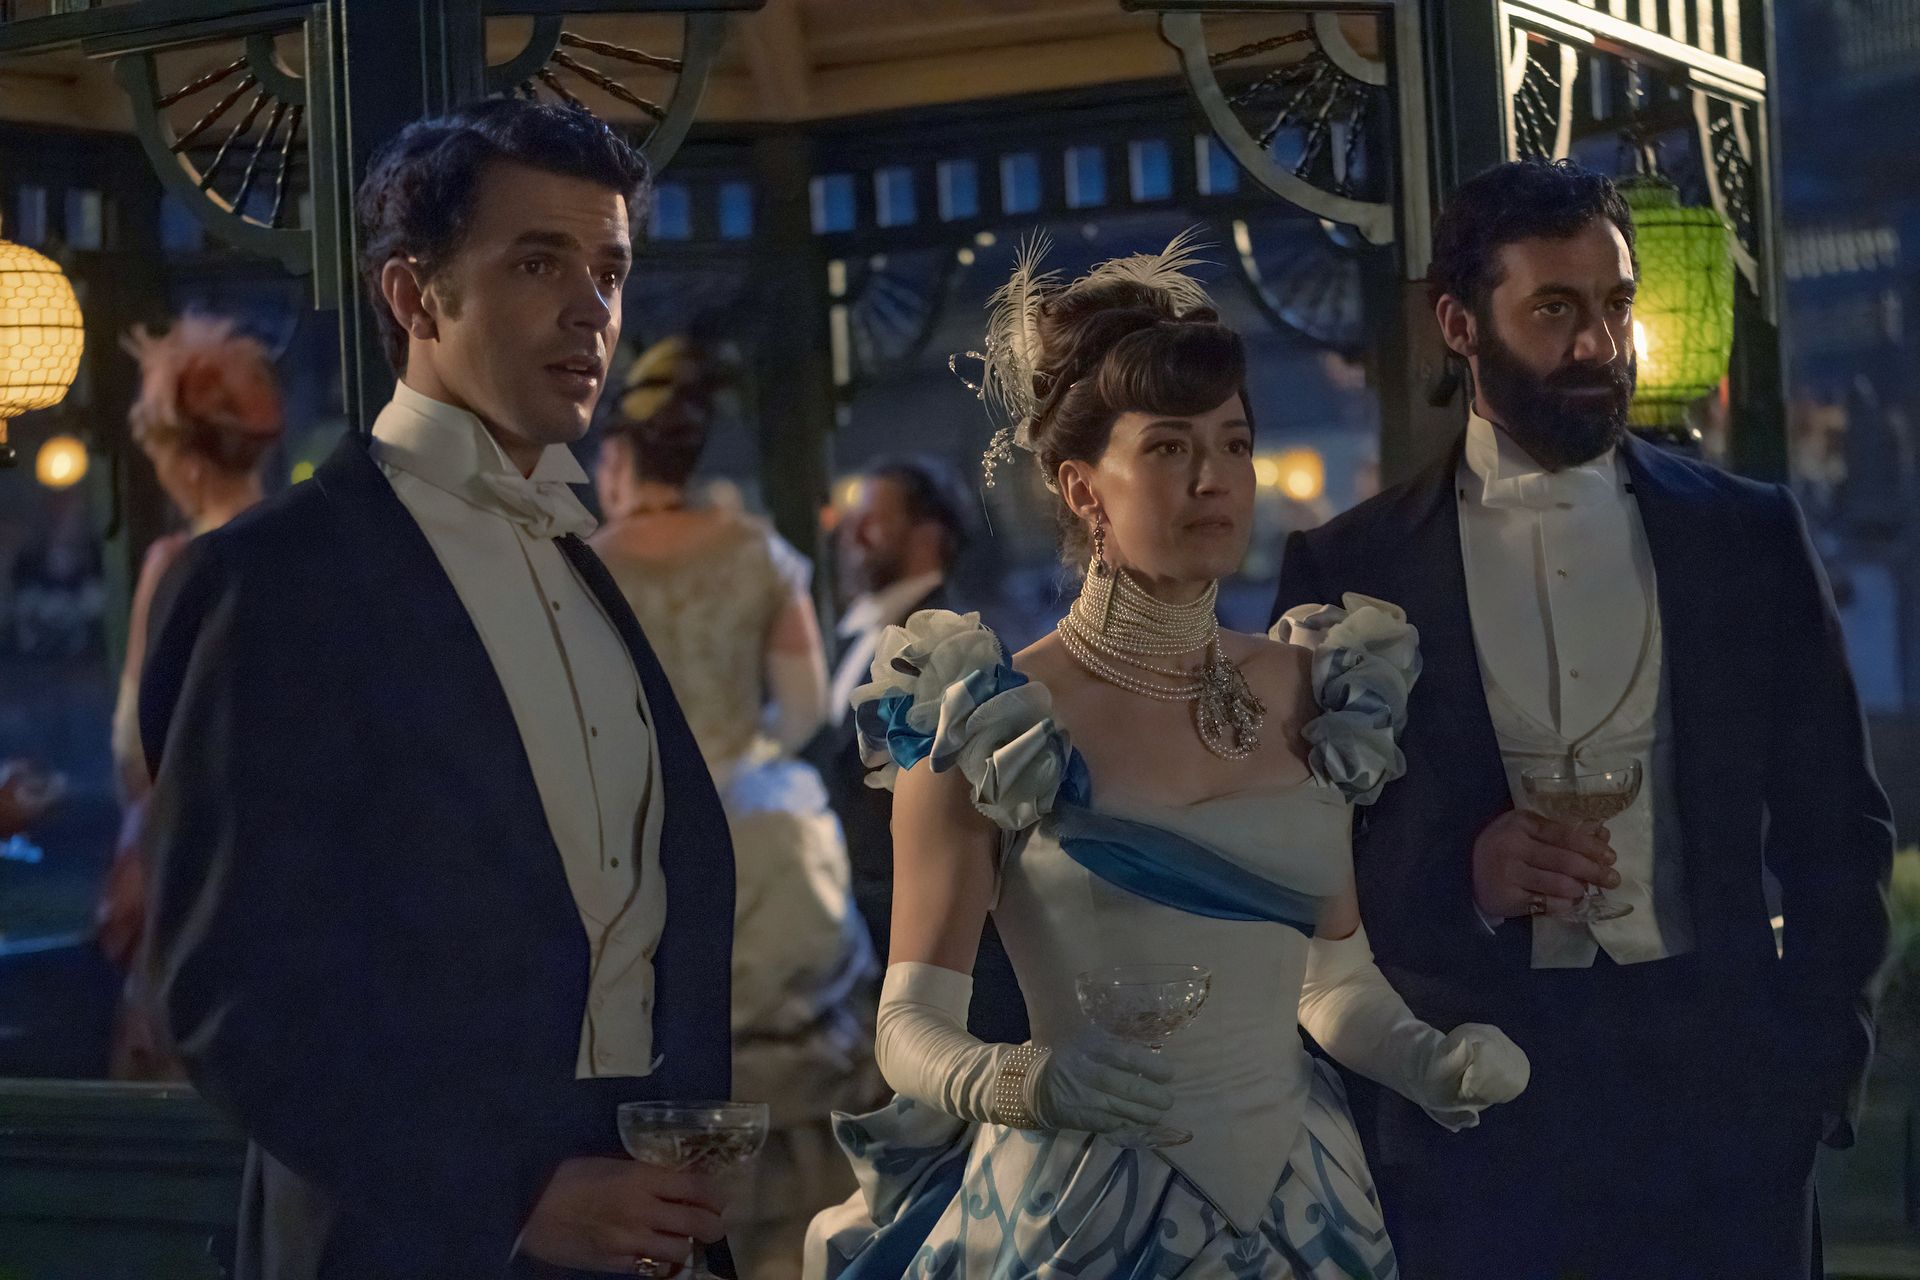 Harry Richardson as Larry Russell, Carrie Coon as Bertha Russell, and Morgan Spector as George Russell in 'The Gilded Age' Season 2